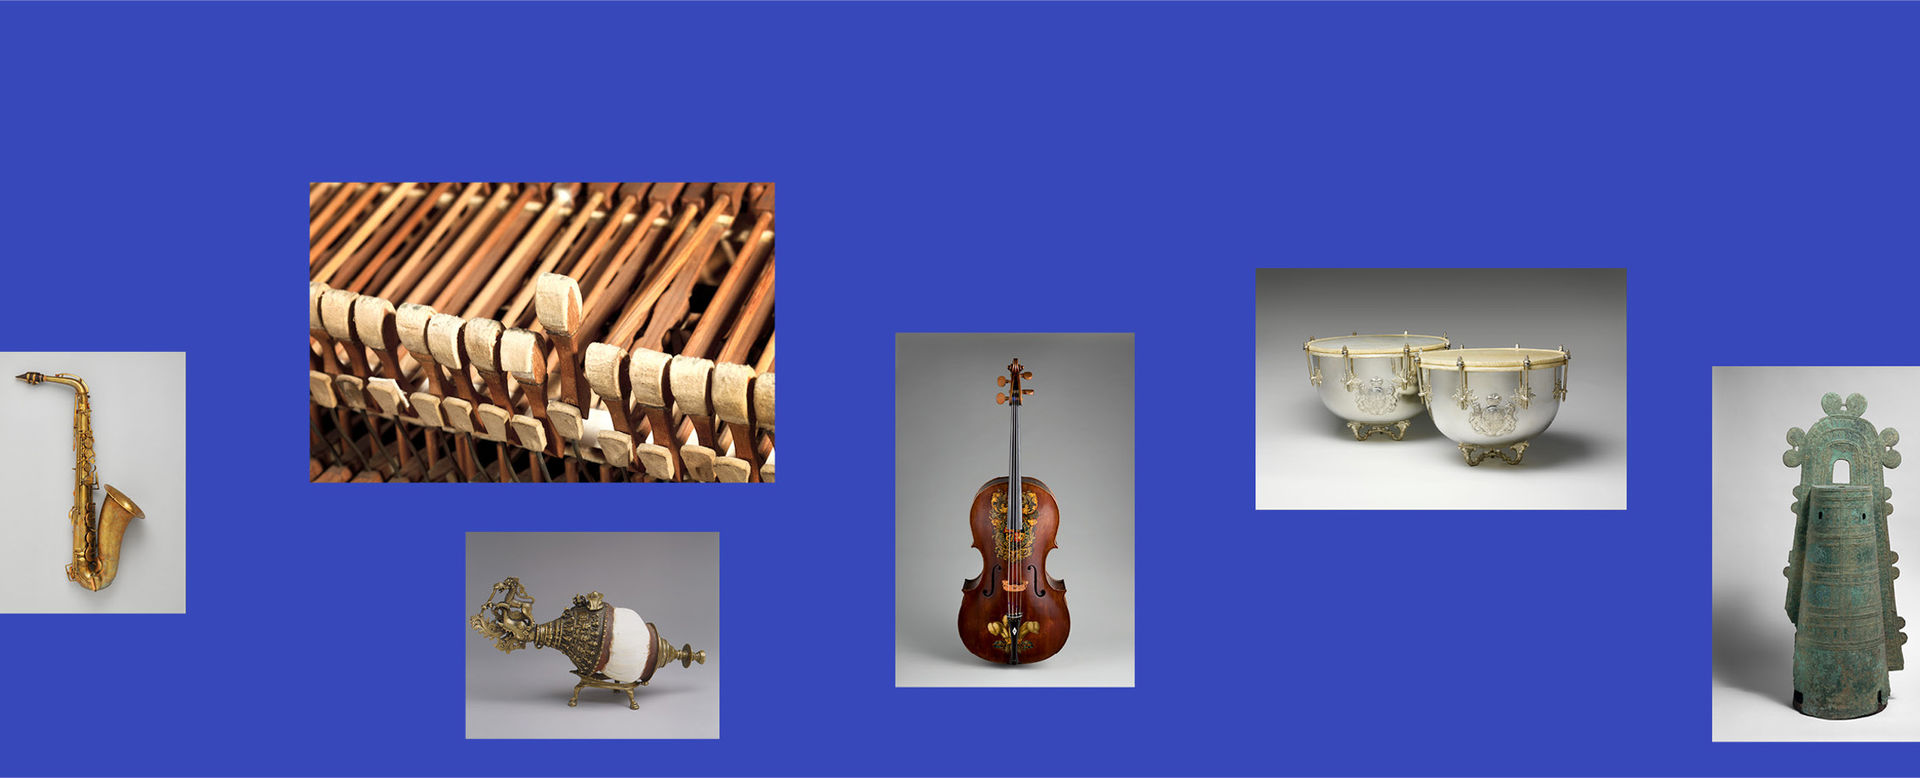 Images of some of the musical instruments from The Met's diverse collection